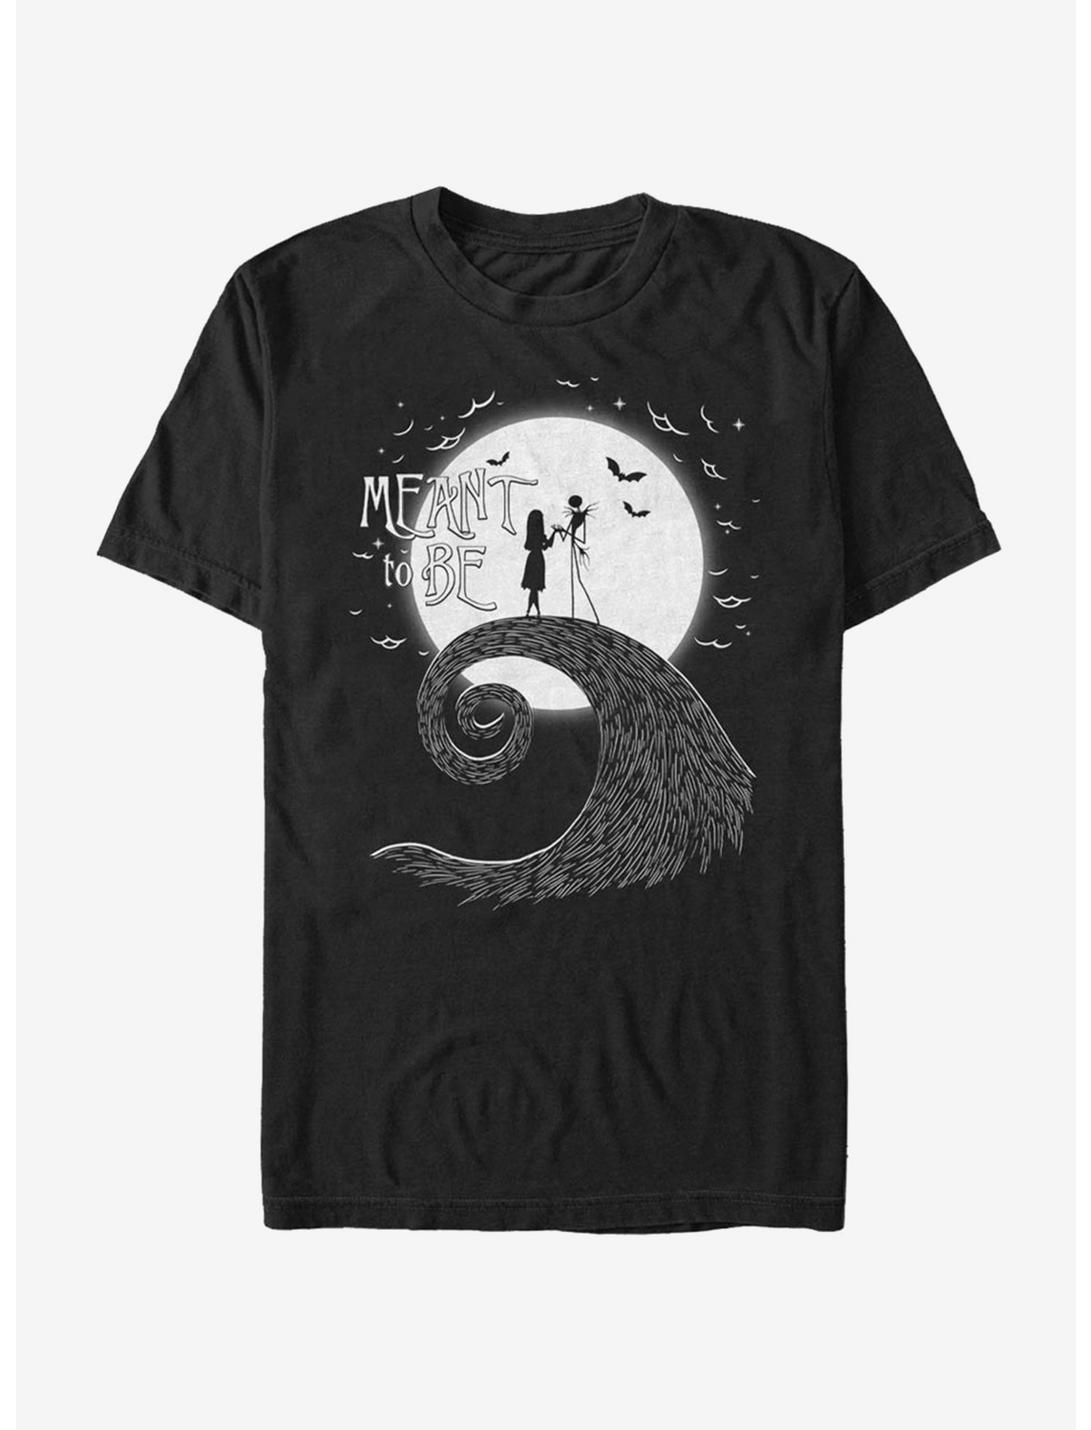 Disney The Nightmare Before Christmas Meant To Be T-Shirt, BLACK, hi-res